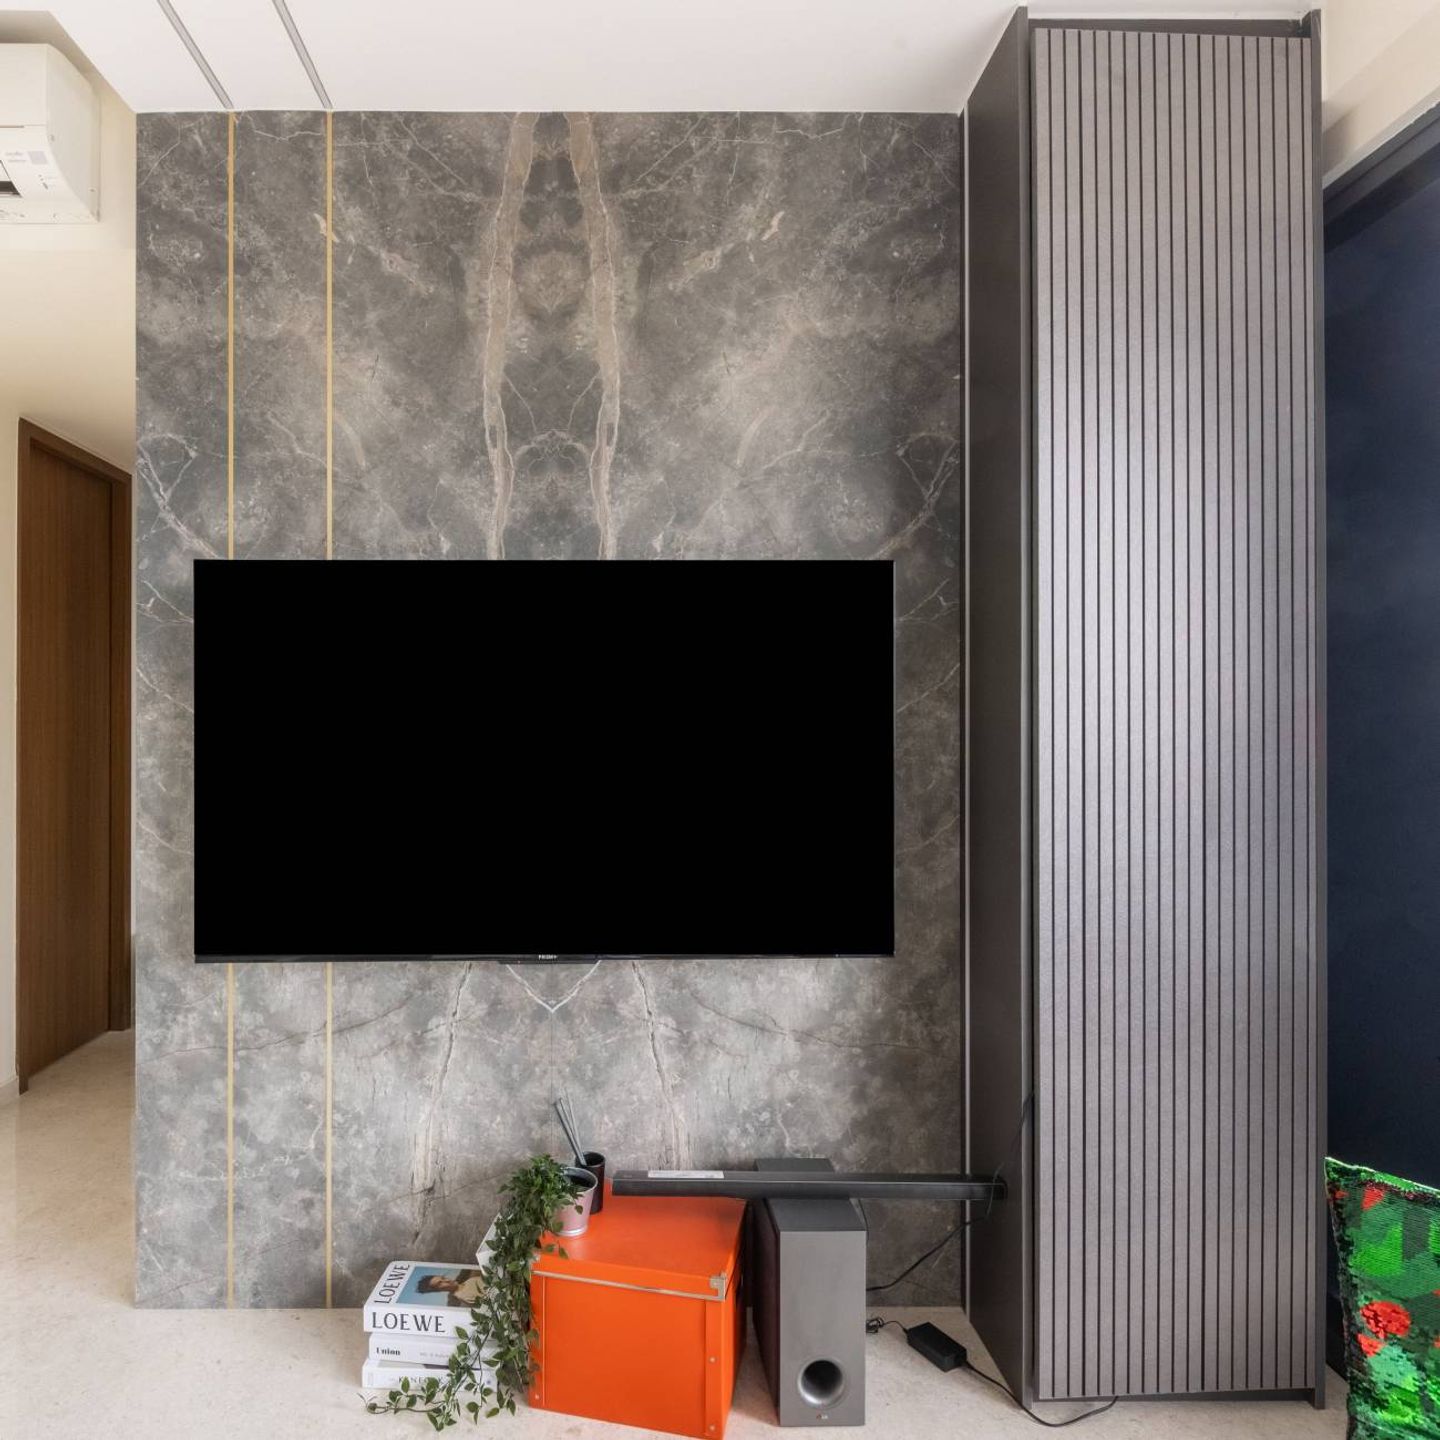 Wall-Mounted Grey TV Cabinet Design With Matching Wall Cladding - Livspace